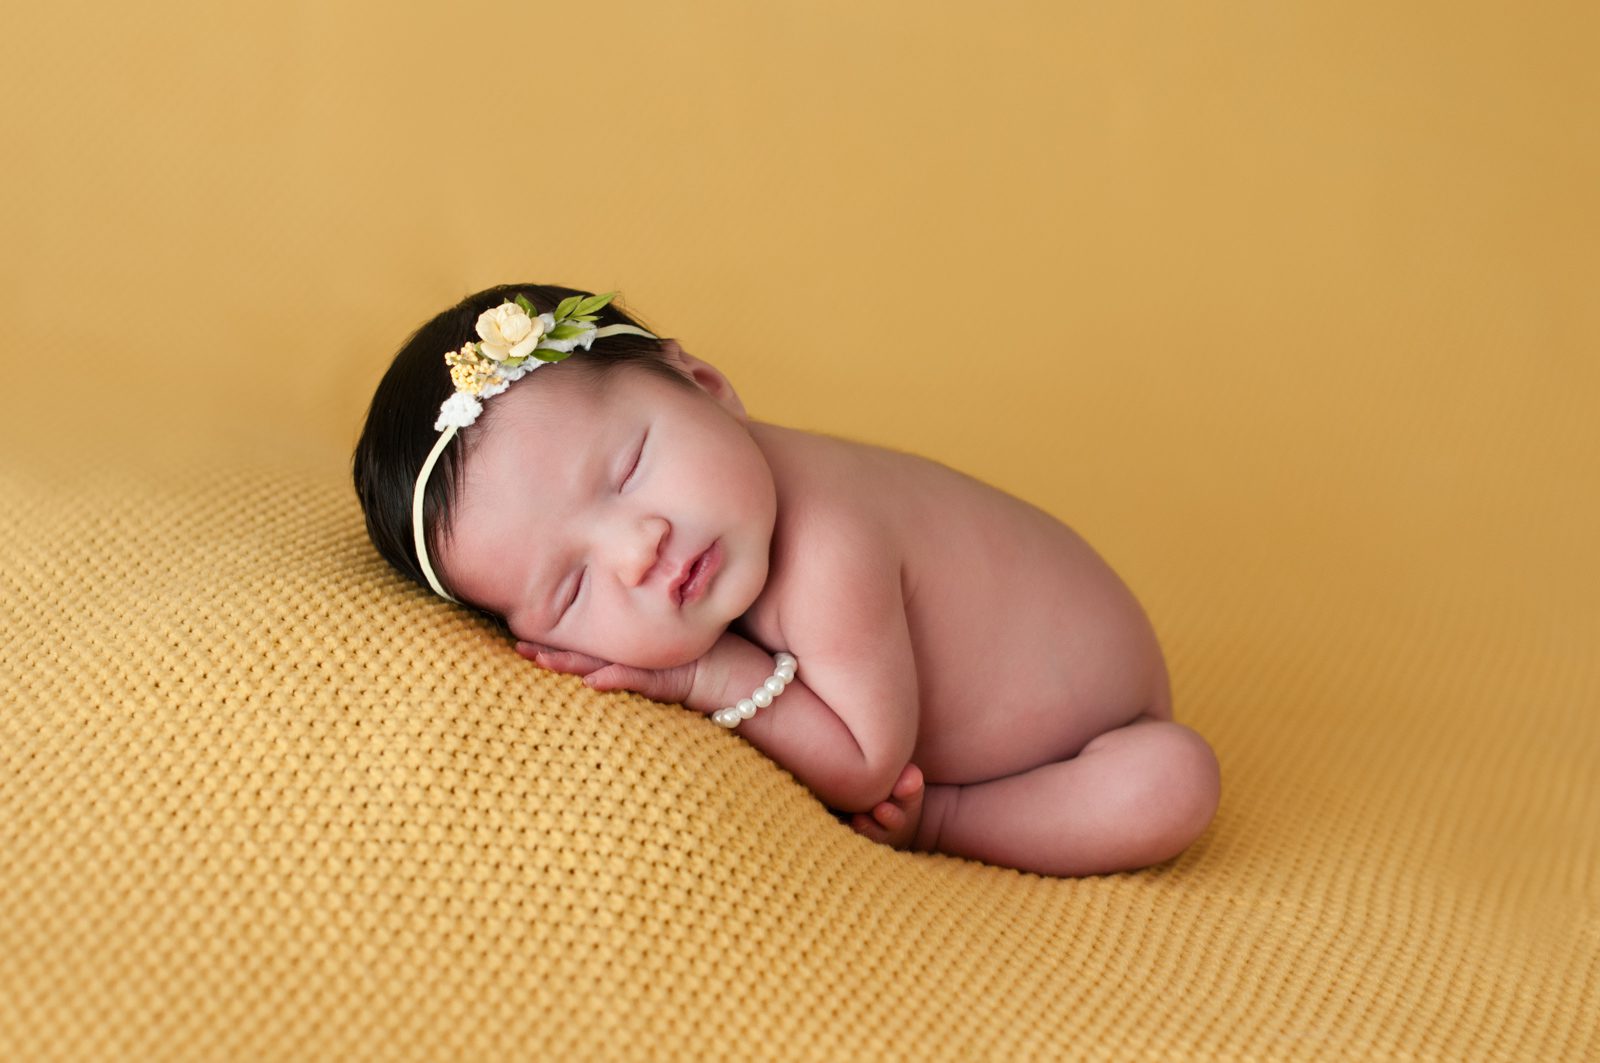 Sleeping naked baby on yellow blanket with flower headband by South Florida newborn photographer